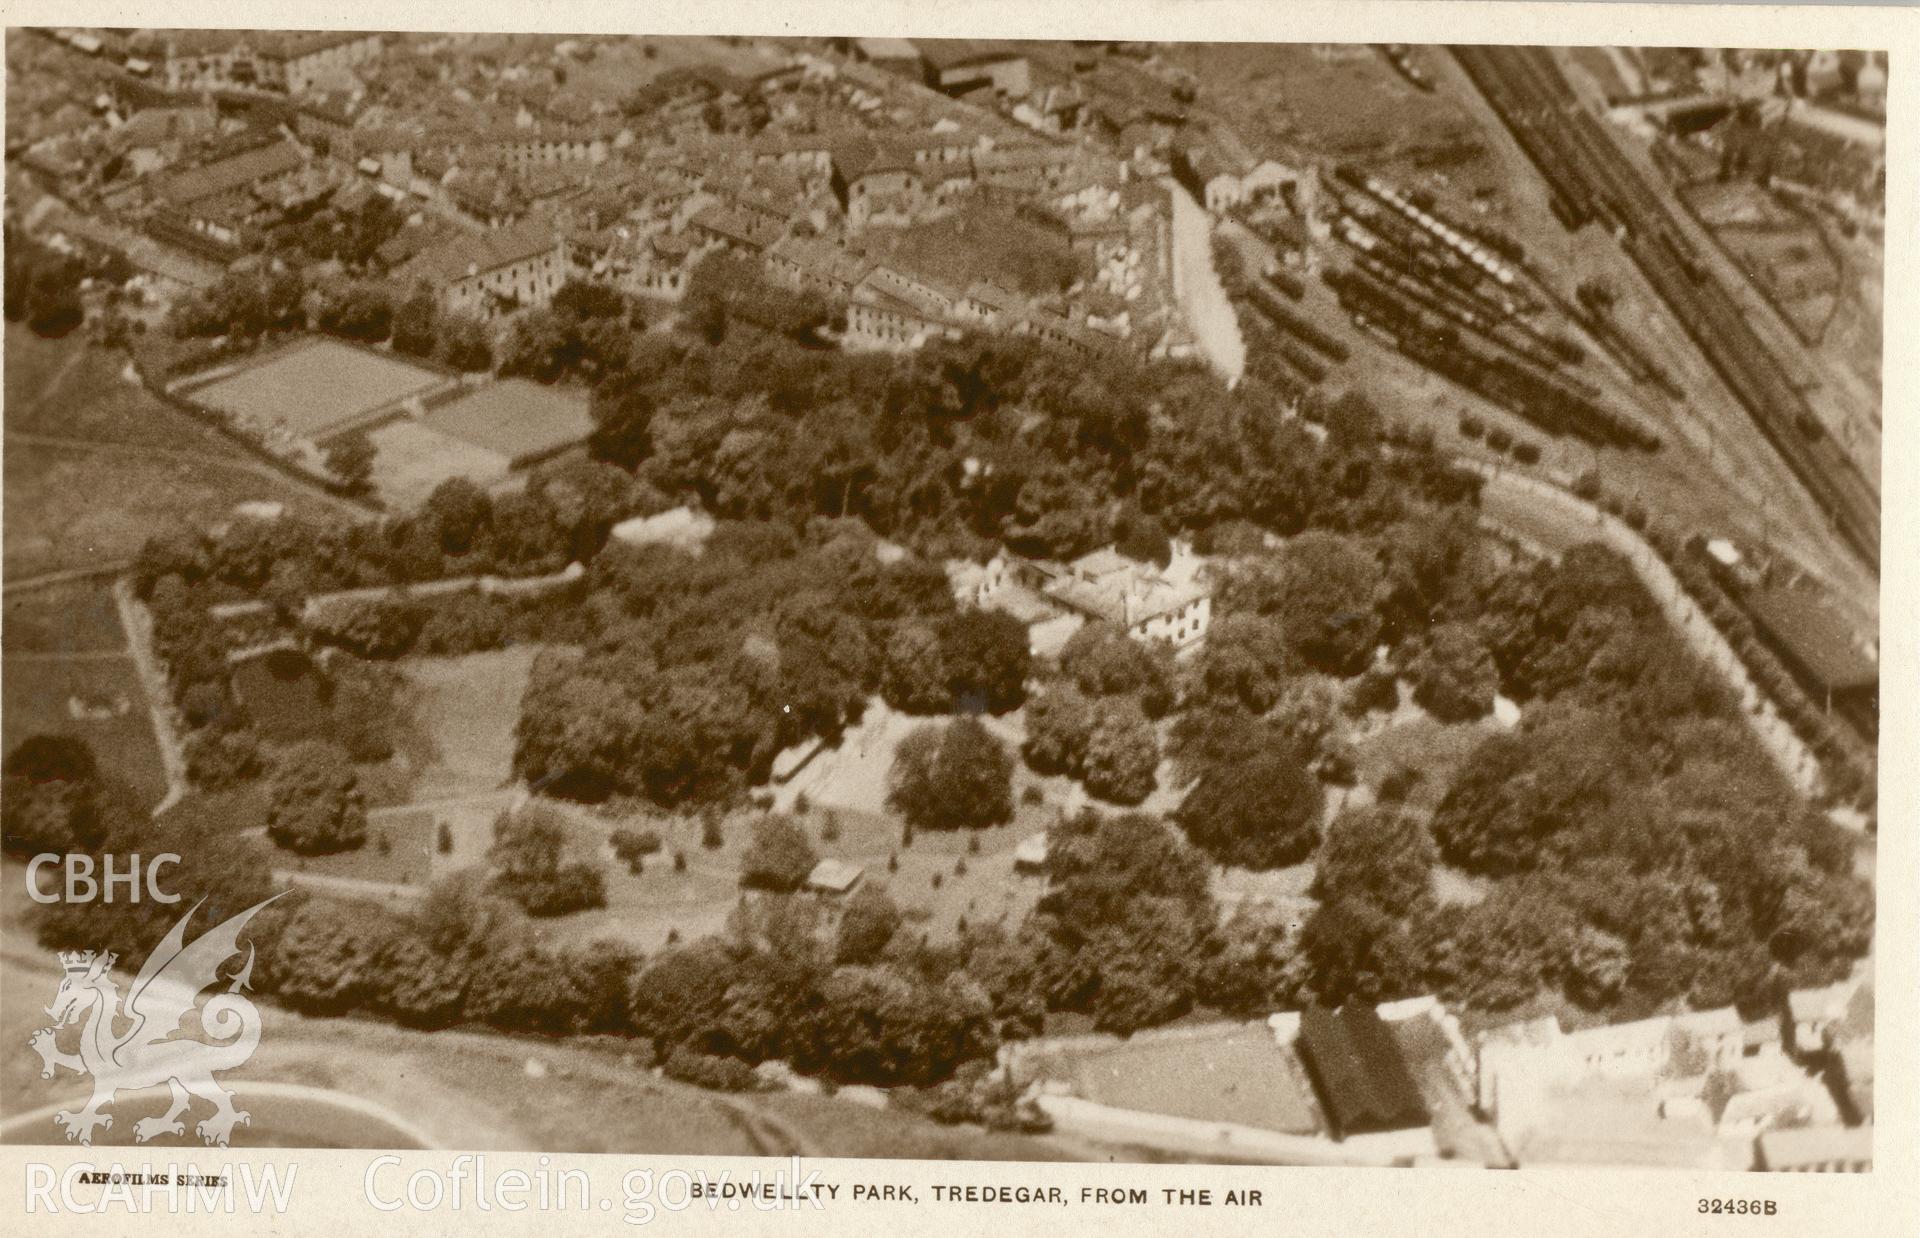 Digitised postcard image of aerial view of Bedwellty Park, Tredegar, Aerofilms Ltd. Produced by Parks and Gardens Data Services, from an original item in the Peter Davis Collection at Parks and Gardens UK. We hold only web-resolution images of this collection, suitable for viewing on screen and for research purposes only. We do not hold the original images, or publication quality scans.